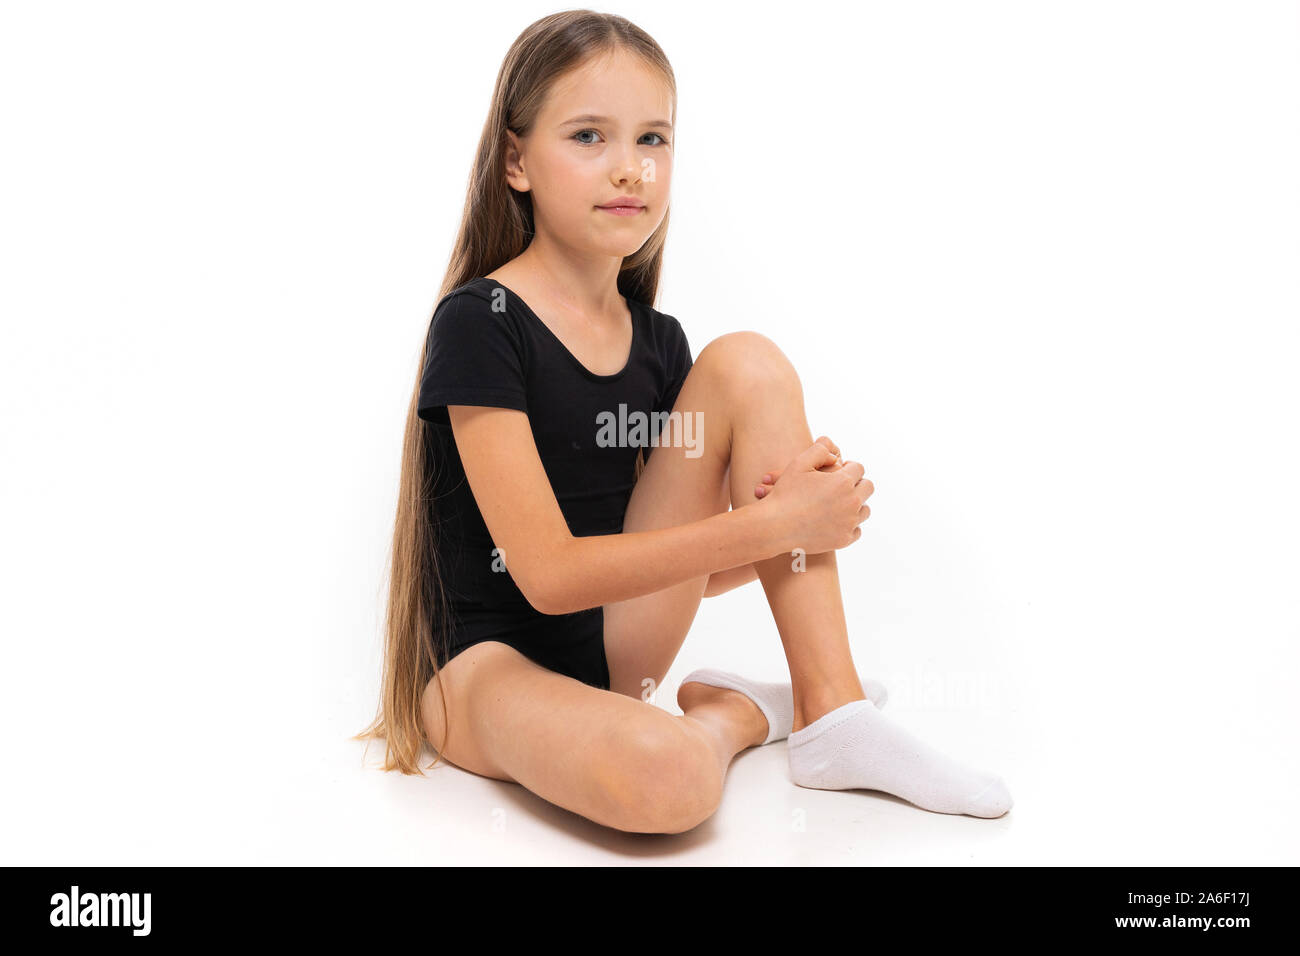 Picture of a gymnast girl sits in white short socks and black trico full height isolated on a white background Stock Photo